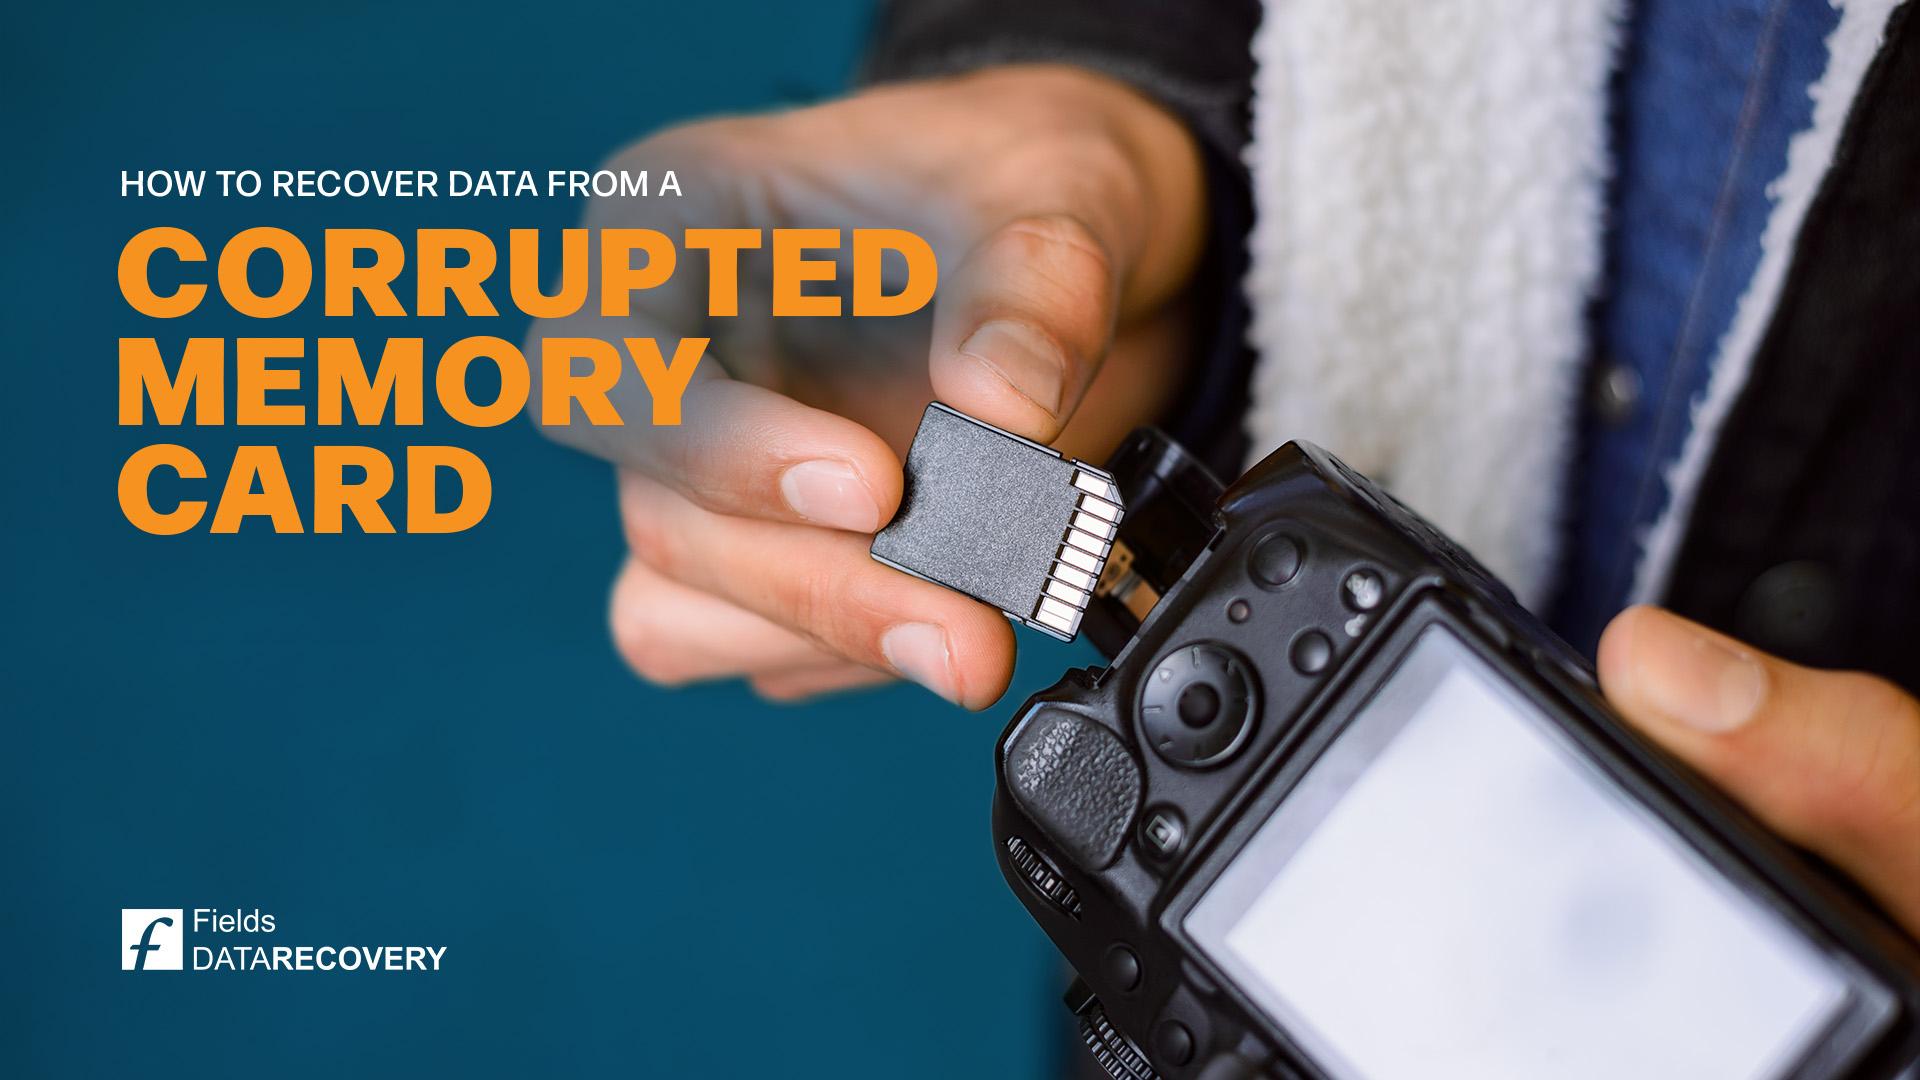 How to Recover Data from a Corrupted Memory Card